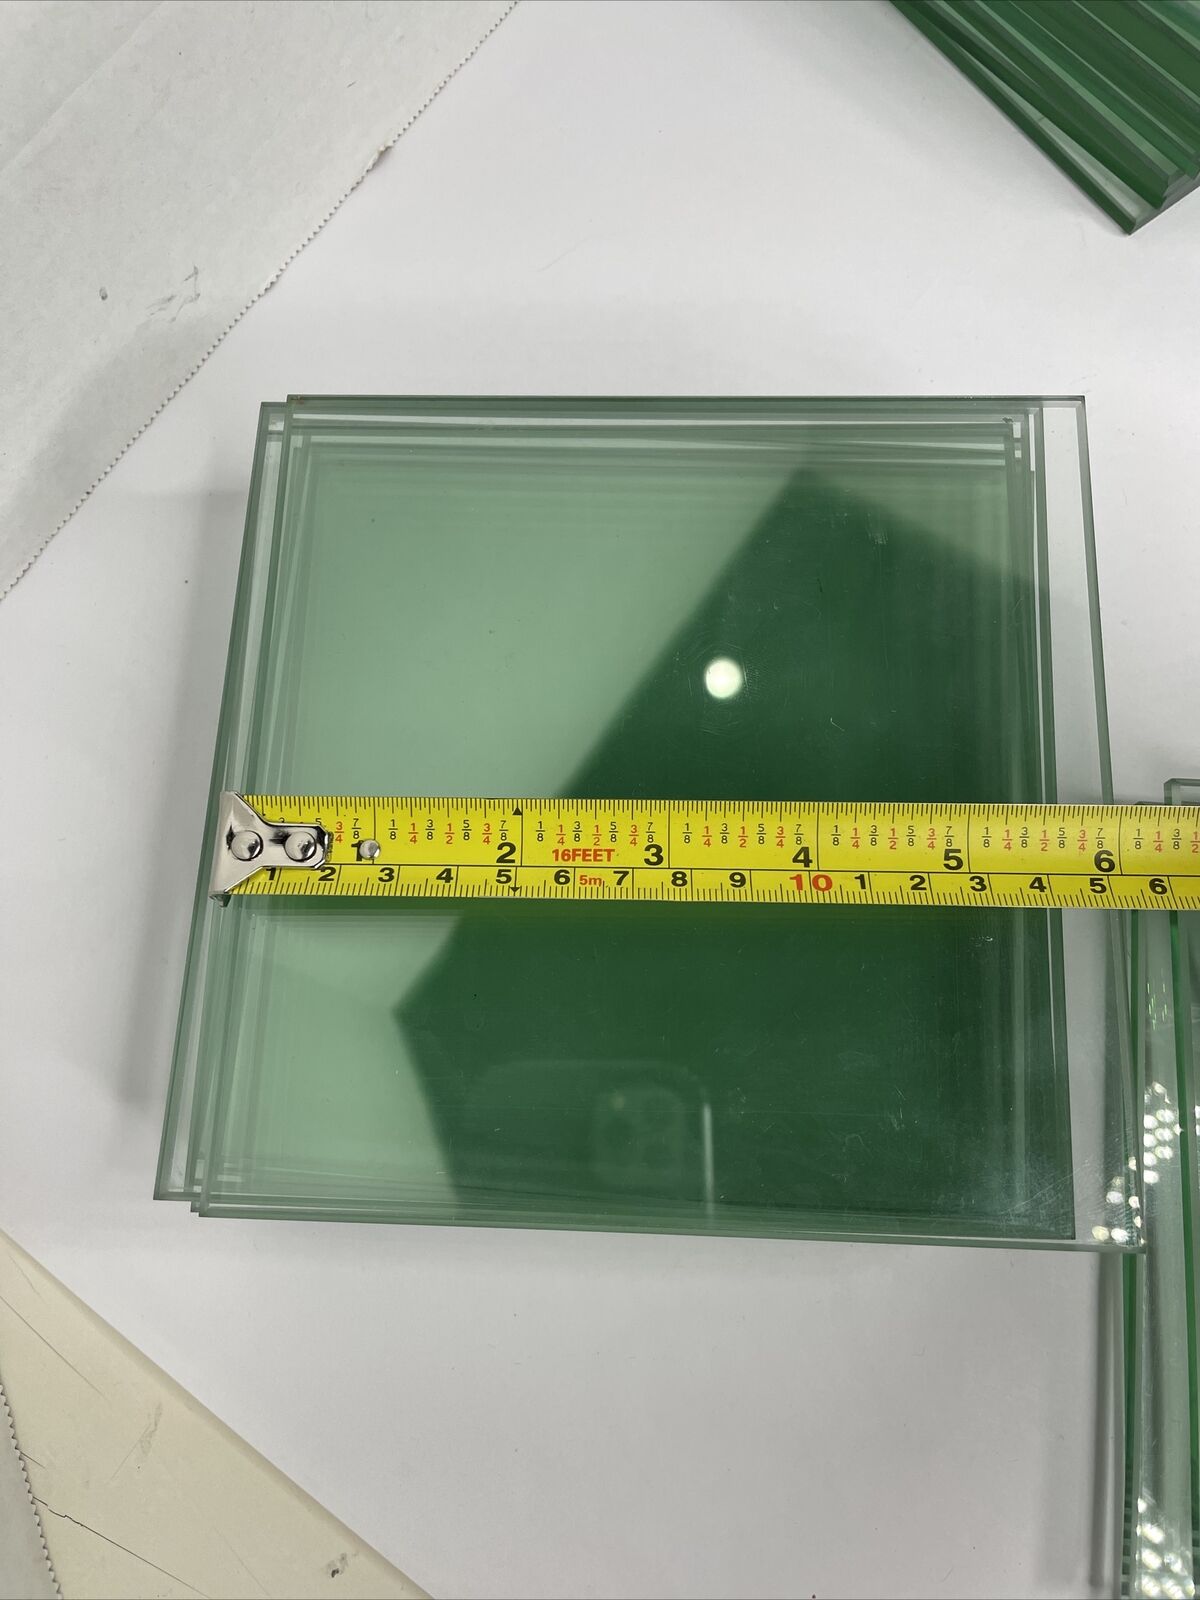 LOT OF 30 -  Square Clear Glass 6" x 6" (nominal) x 6mm Thick - Flat Polish Edge Unbranded Does Not Apply - фотография #2